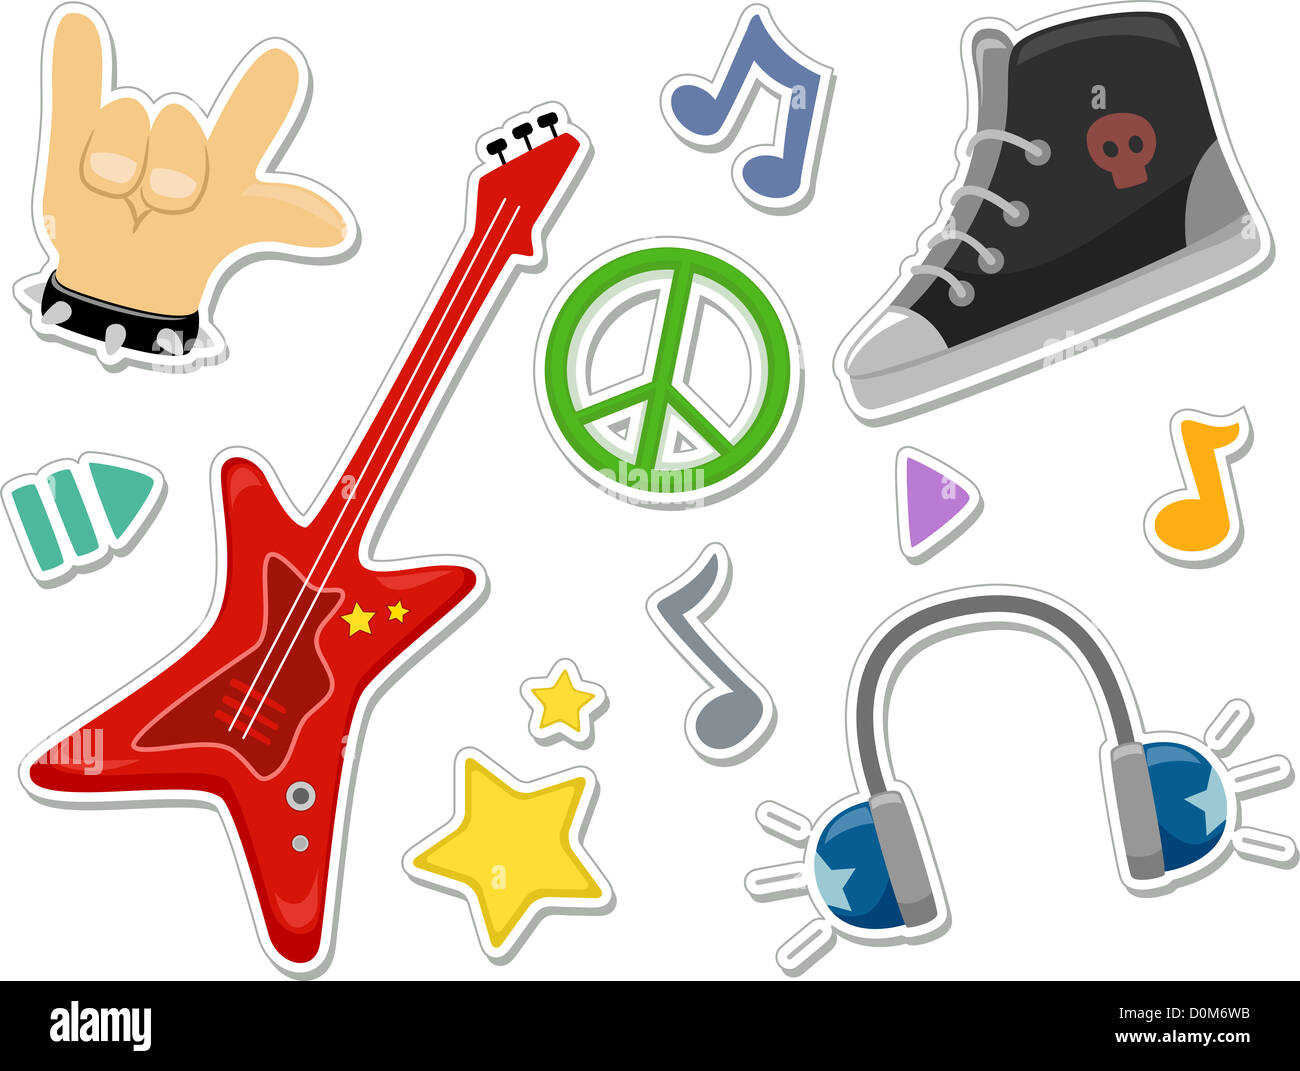 Illustration Featuring Rock Music Related Elements that Can be Printed Out as Stickers Stock Photo